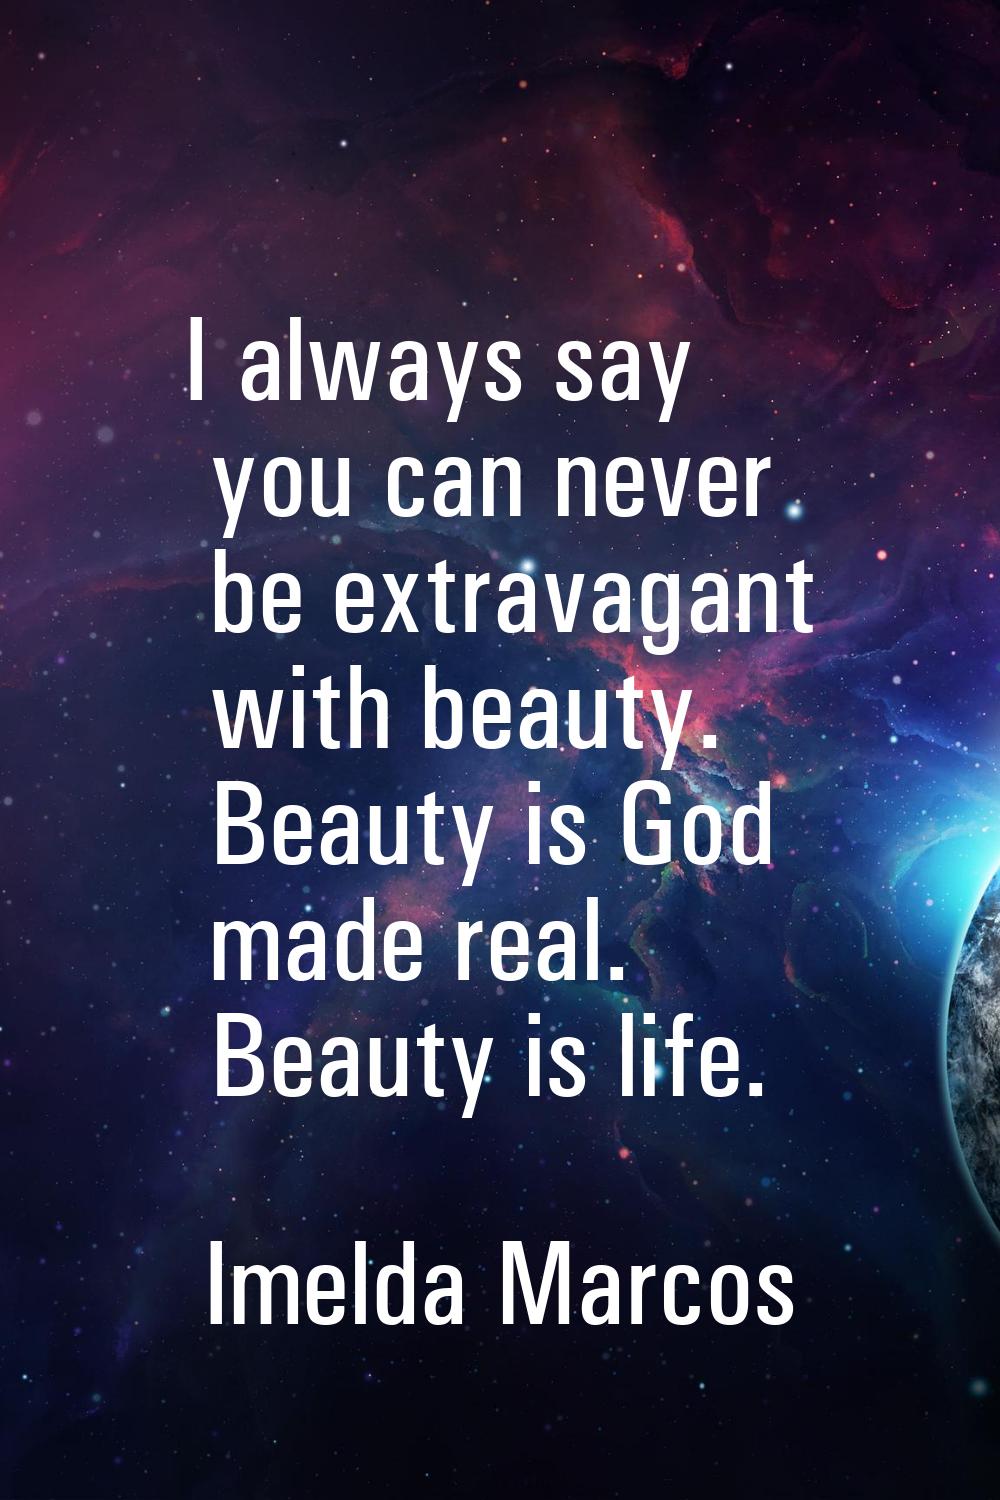 I always say you can never be extravagant with beauty. Beauty is God made real. Beauty is life.